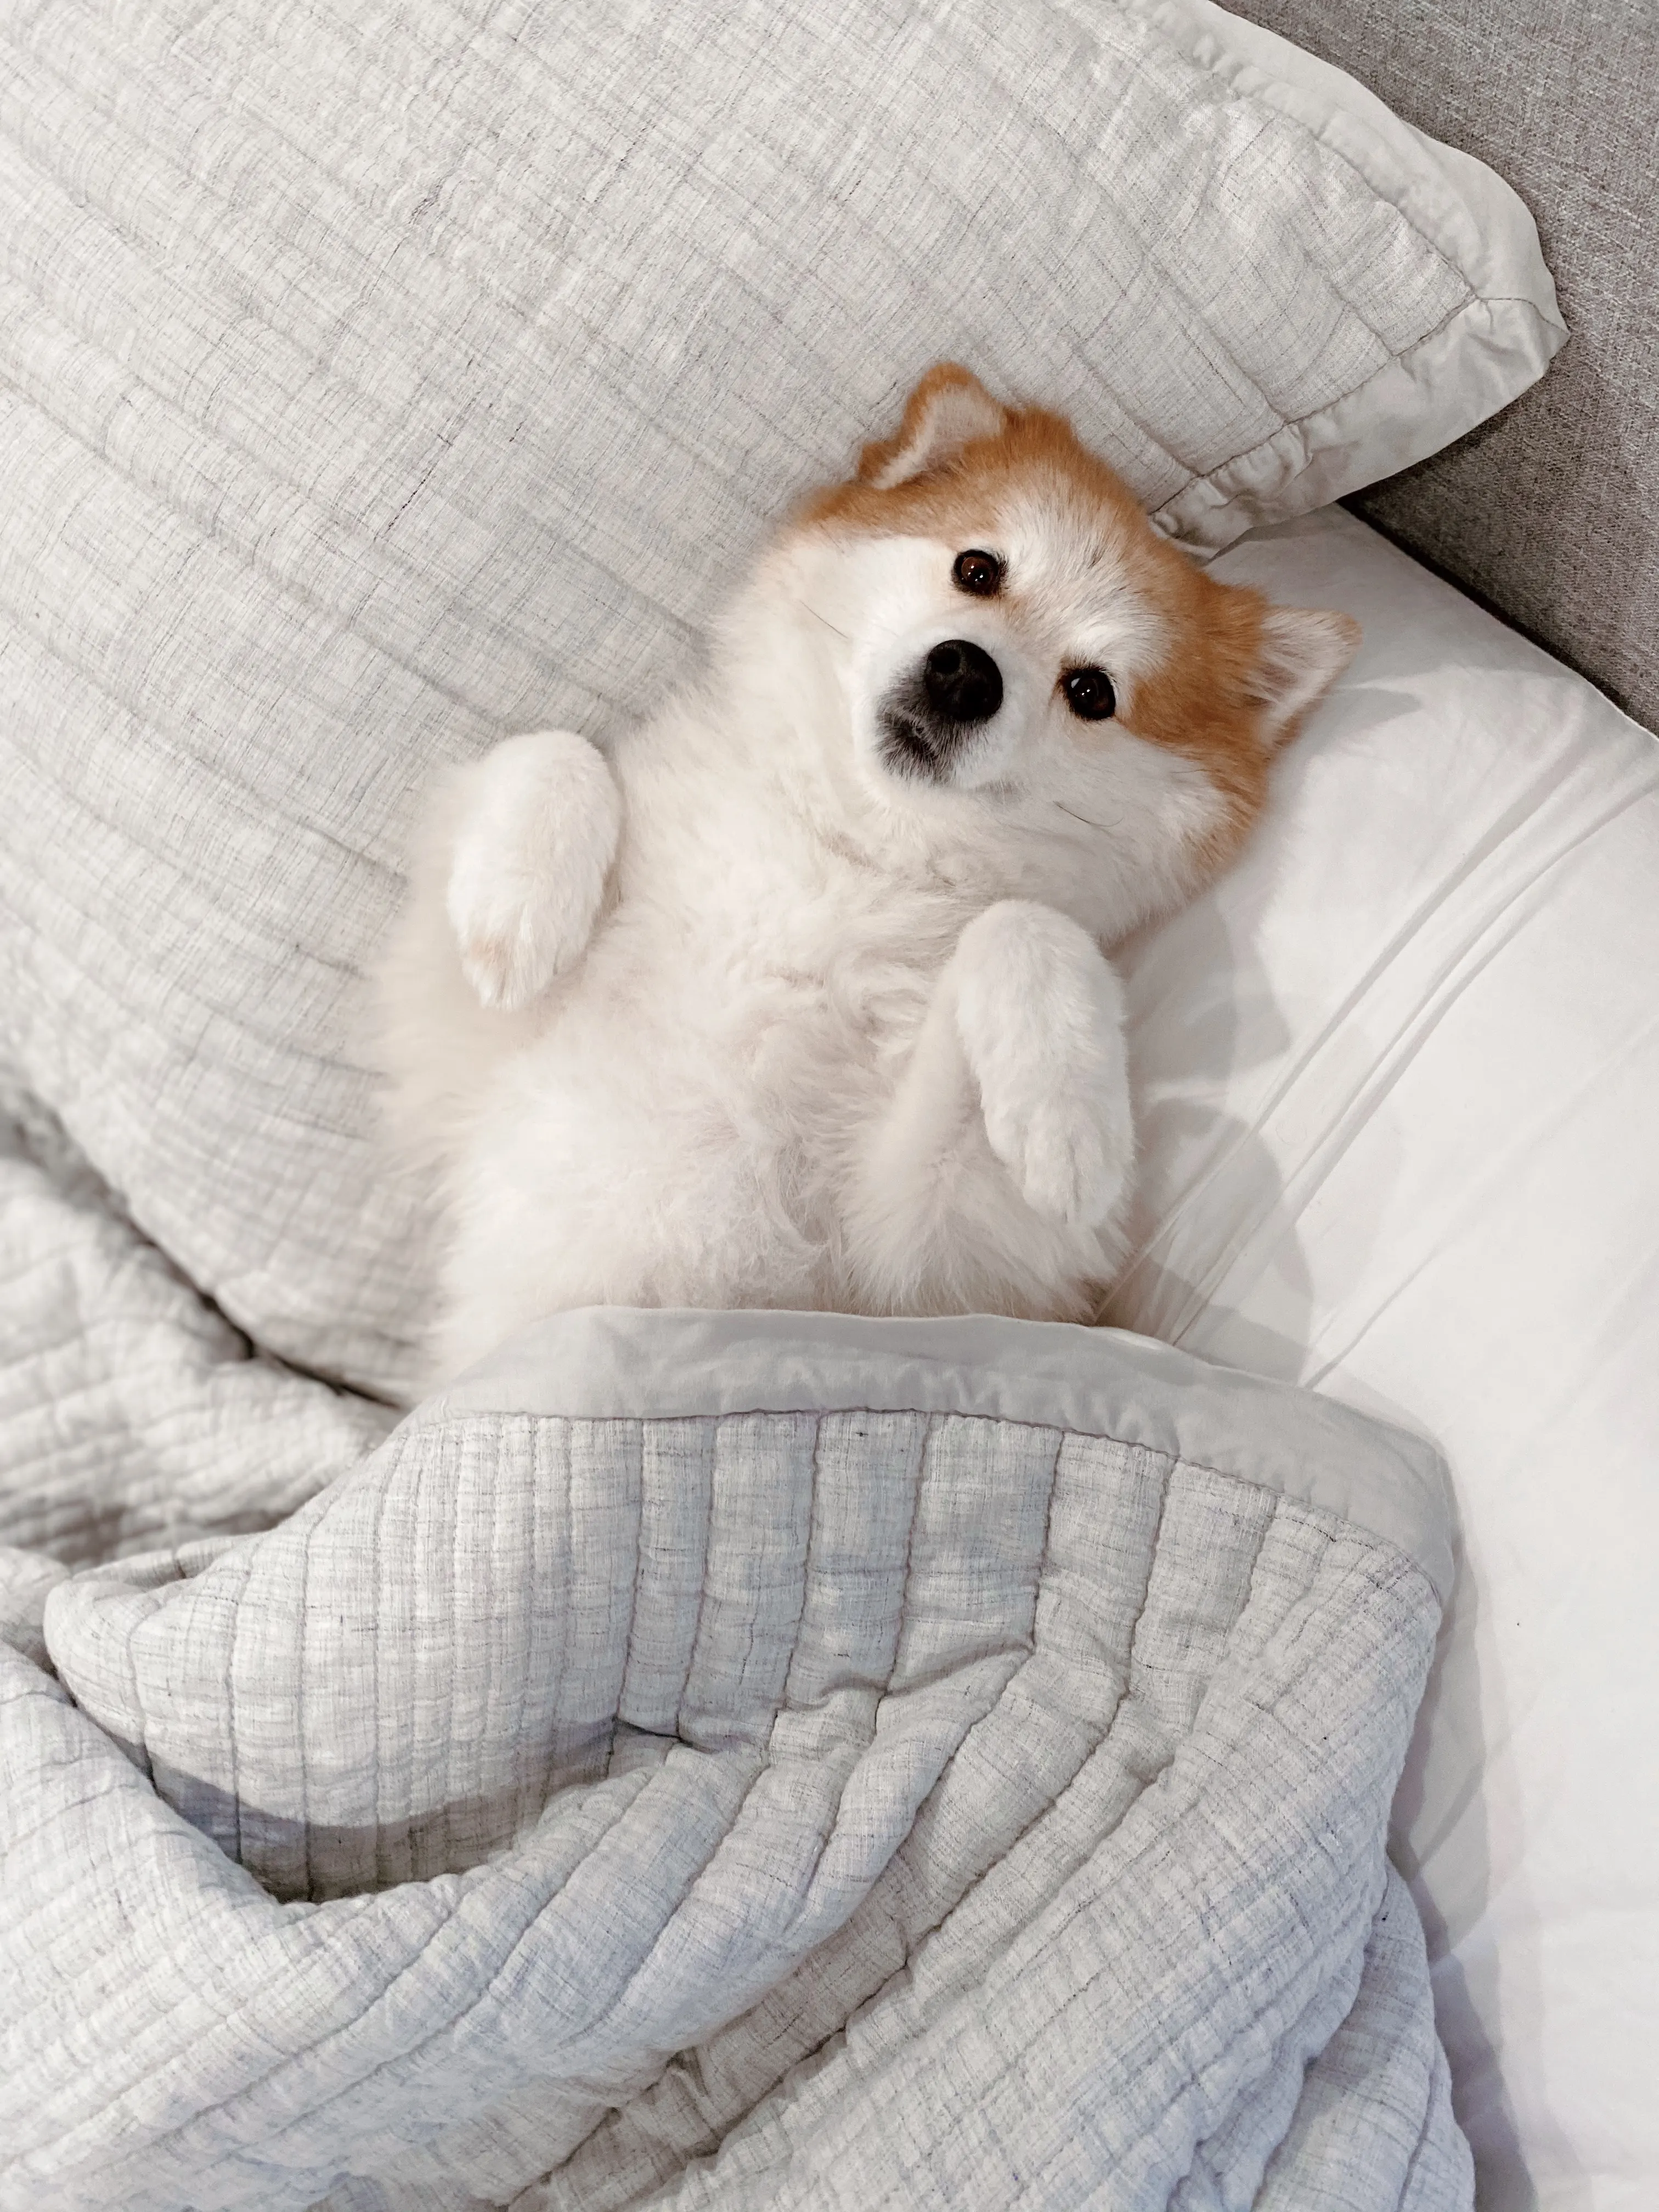 Dog laying in covers on bed